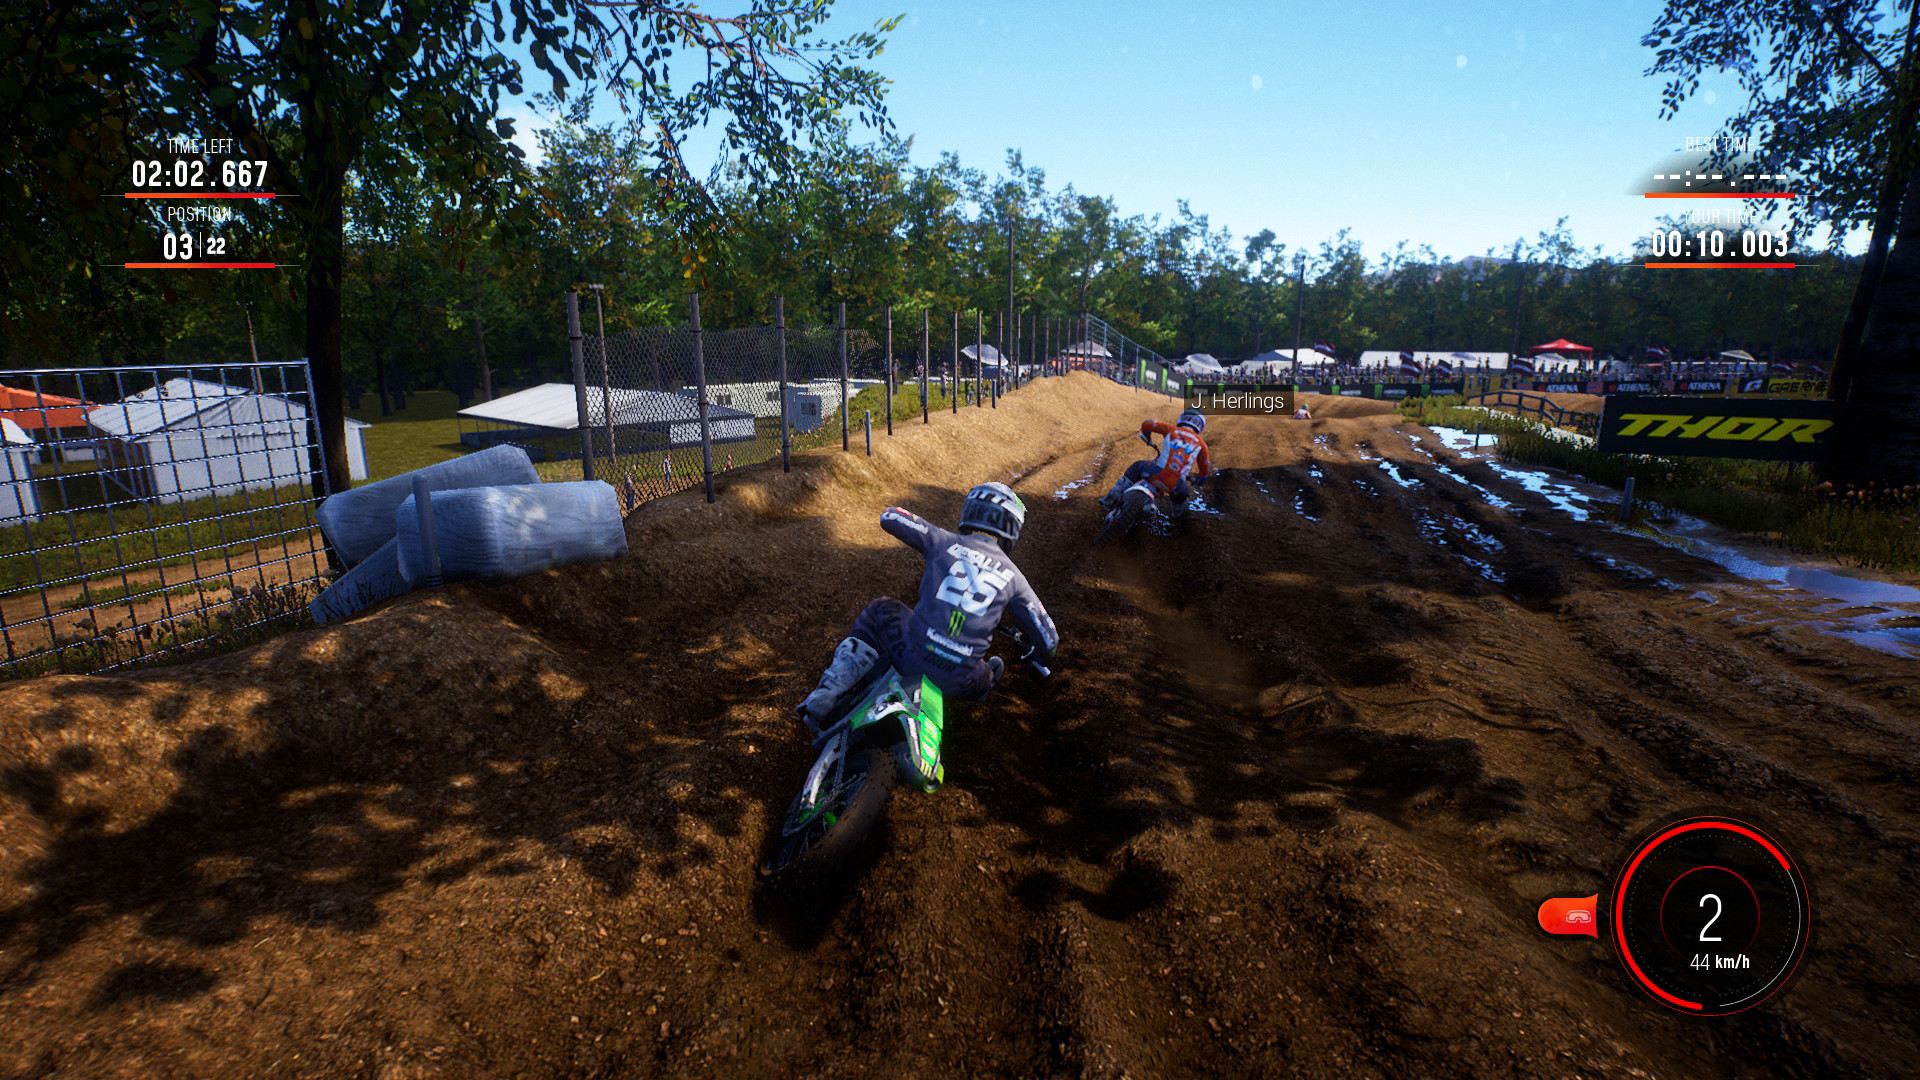 MXGP 2019 - The Official Motocross Videogame on Steam